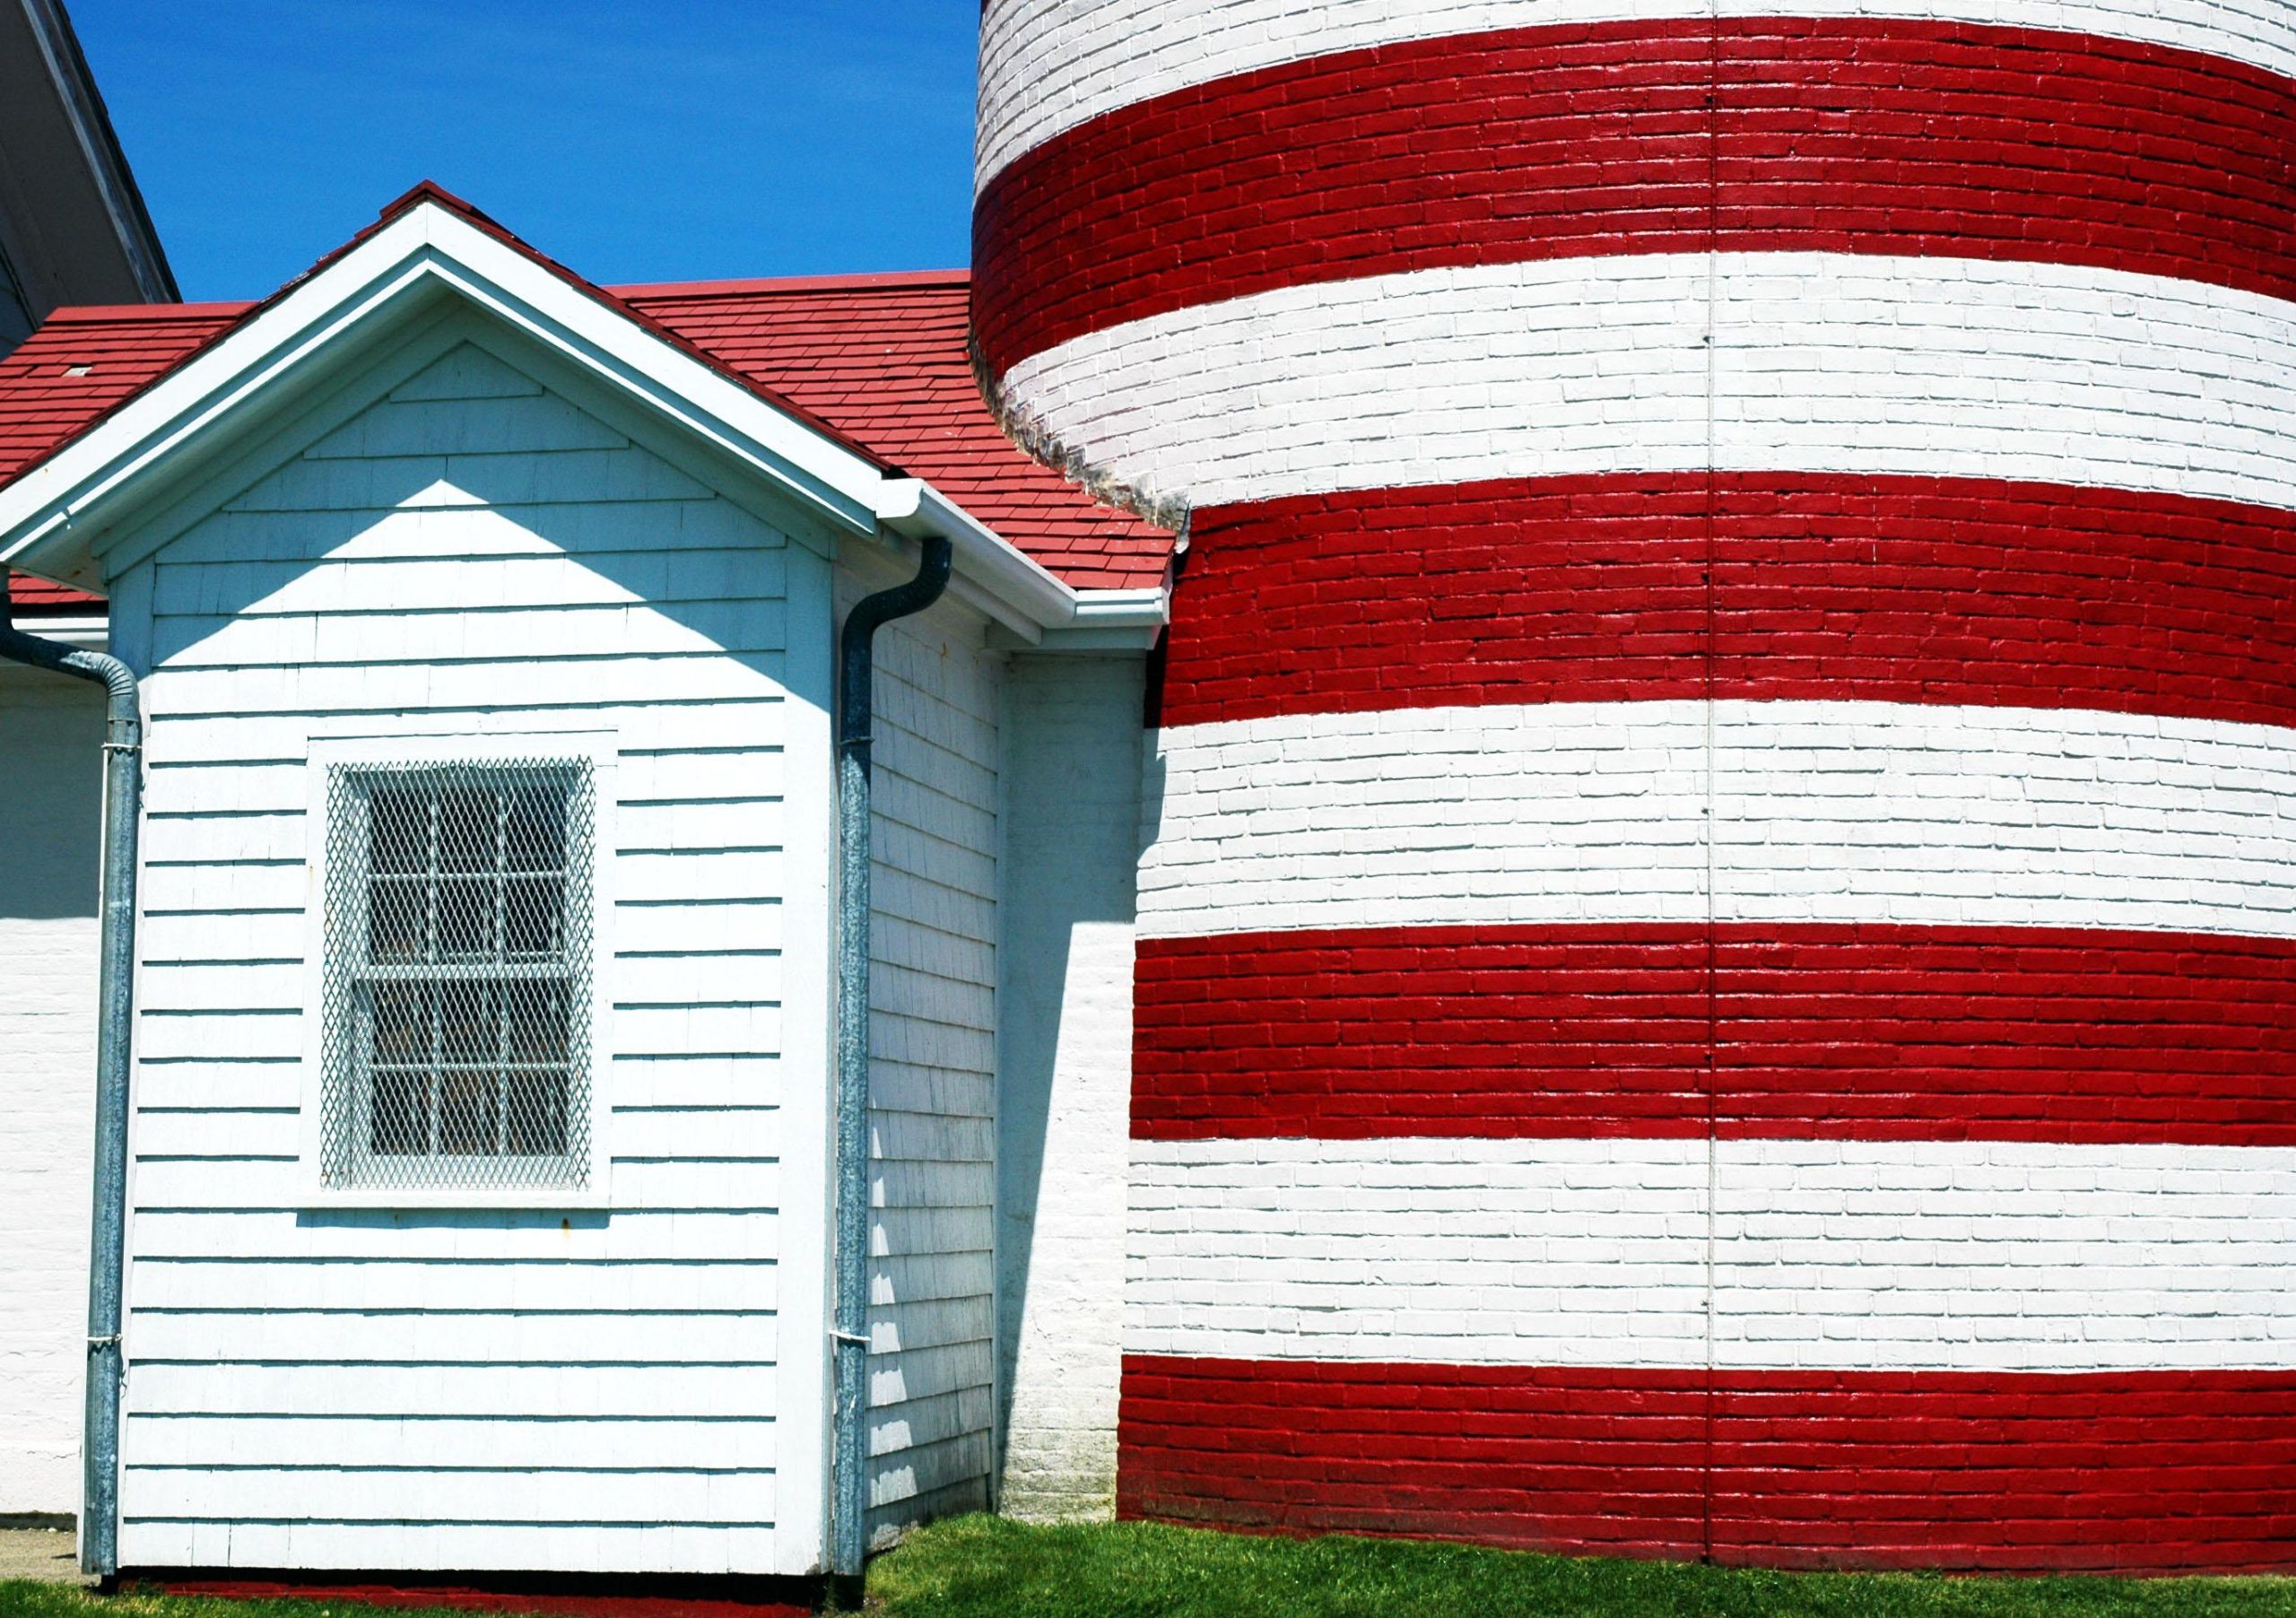 West Quoddy Head Light (user submitted)